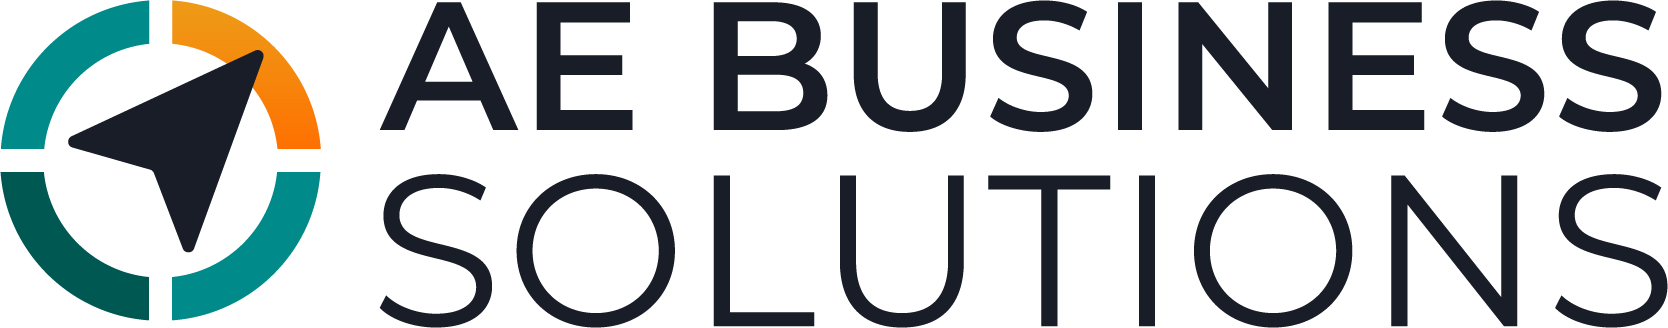 AE Business Solutions logo